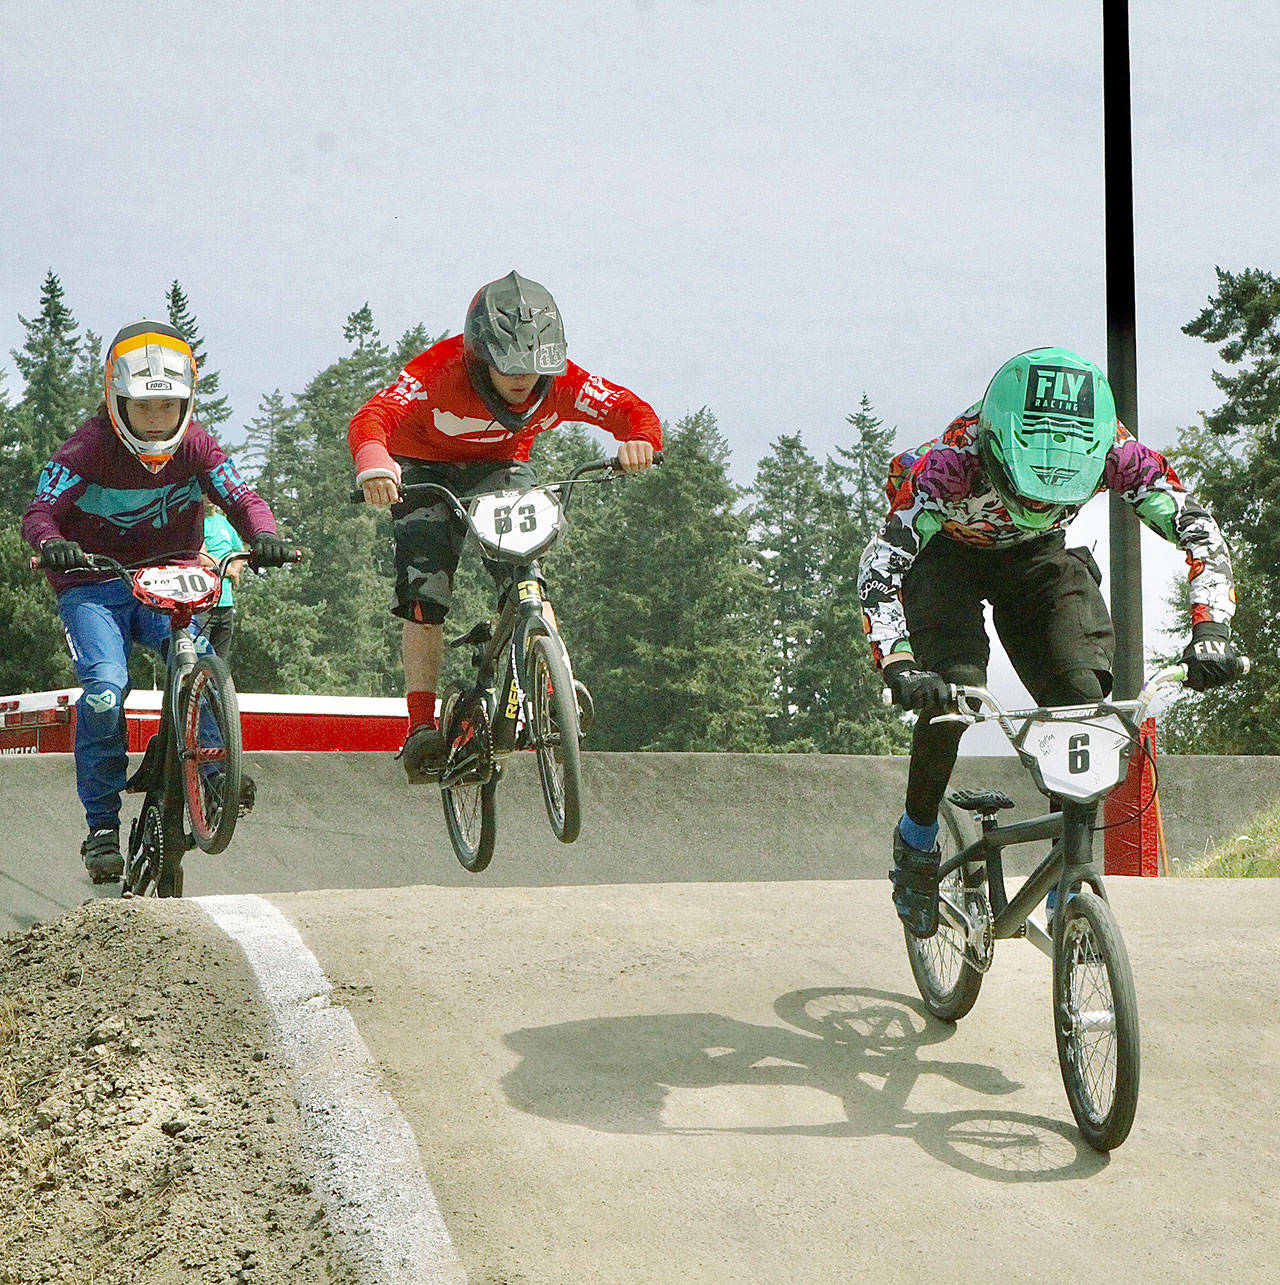 Lincoln Park BMX Track was the center for BMX racing in Western Washington over the weekend as the park hosted state-qualifying races for the state championships in Spokane next month and Gold Cup qualifiers for a five-state regional championship in Richland in September. In the 14 Expert class are No. 10 Josiah Ringstad of Port Orchard, No. 63 Cash Coleman of Port Angeles and, in the lead, No. 6 Jackson Beal of Port Townsend. (Dave Logan/for Peninsula Daily News)